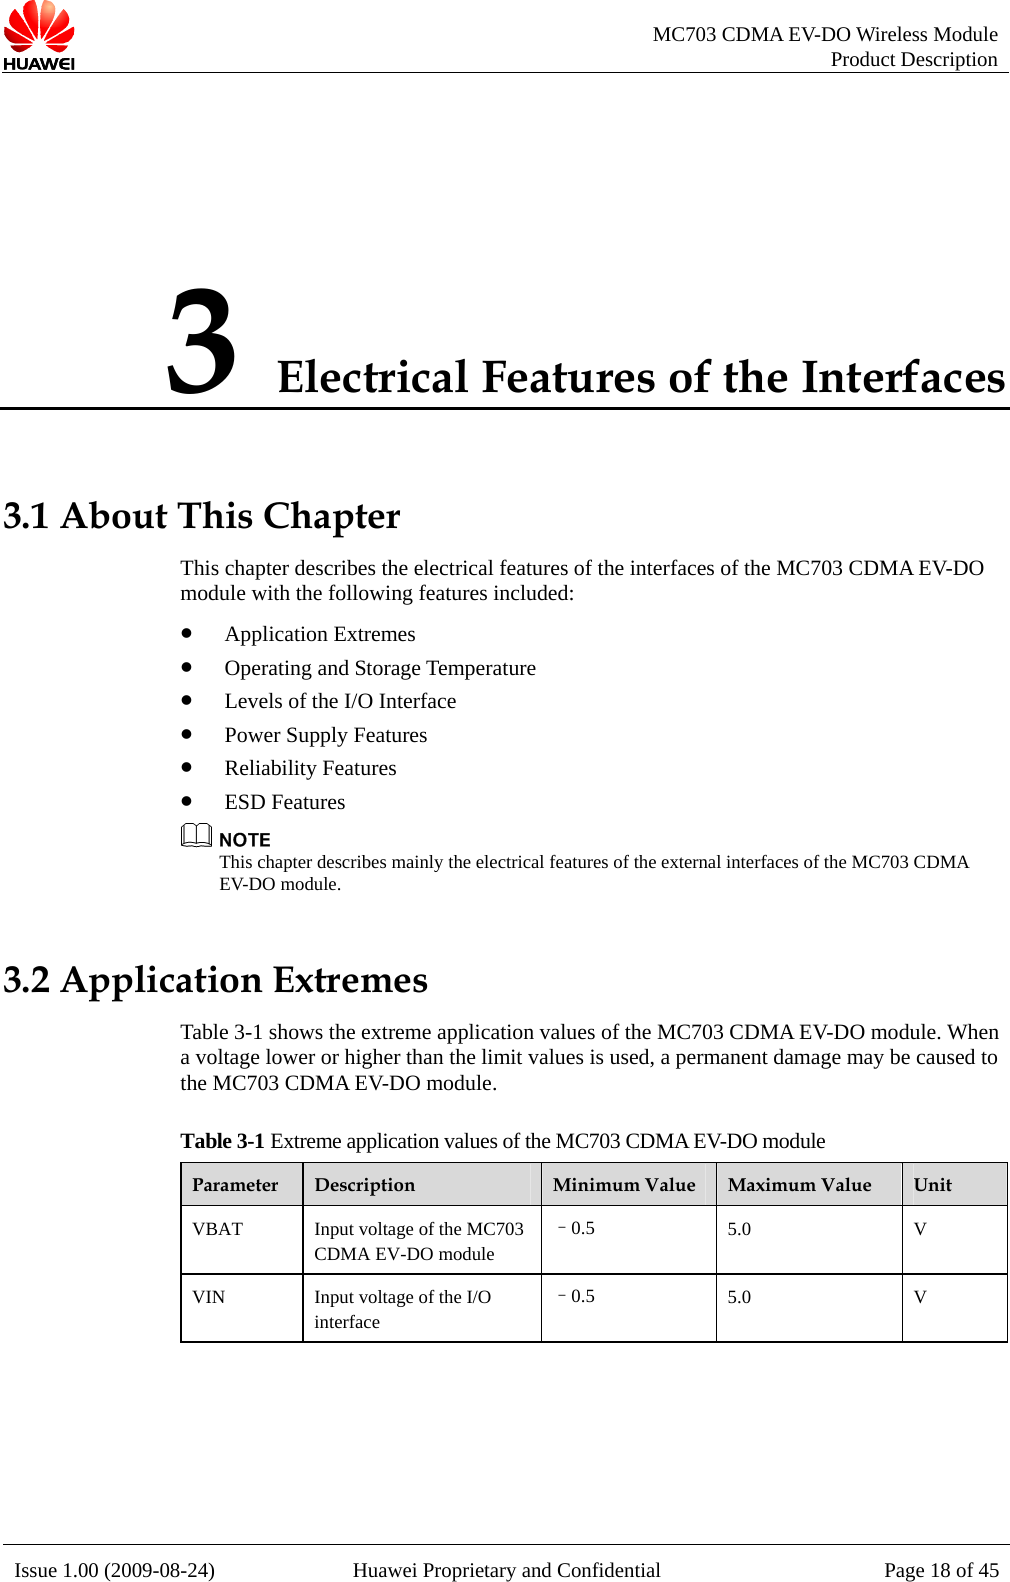   MC703 CDMA EV-DO Wireless Module Product Description Issue 1.00 (2009-08-24)  Huawei Proprietary and Confidential Page 18 of 453 Electrical Features of the Interfaces 3.1 About This Chapter es of the interfaces of the MC703 CDMA EV-DO d es included: e Temperature O Interface ly Features z z  This chapter describes the electrical featurmo ule with the following featurz Application Extremes z Operating and Storagz Levels of the I/z Power SuppReliability Features ESD Features  the electrical features of the external interfaces of the MC703 CDMA 3.2 Applic module. When e may be caused to t D odule. T Extre e 3 CDMA EV- odule This chapter describes mainlyEV-DO module. ation Extremes Table 3-1 shows the extreme application values of the MC703 CDMA EV-DOa voltage lower or higher than the limit values is used, a permanent damaghe MC703 C MA EV-DO mable 3-1 me application values of th  MC70 DO mParameter  Description  Minimum Value  Maximum Value  Unit VBAT    age of the MC703 CDMA EV-DO module –0.5  5.0 V Input voltVIN  Input voltage of the I/O interface –0.5  5.0 V   